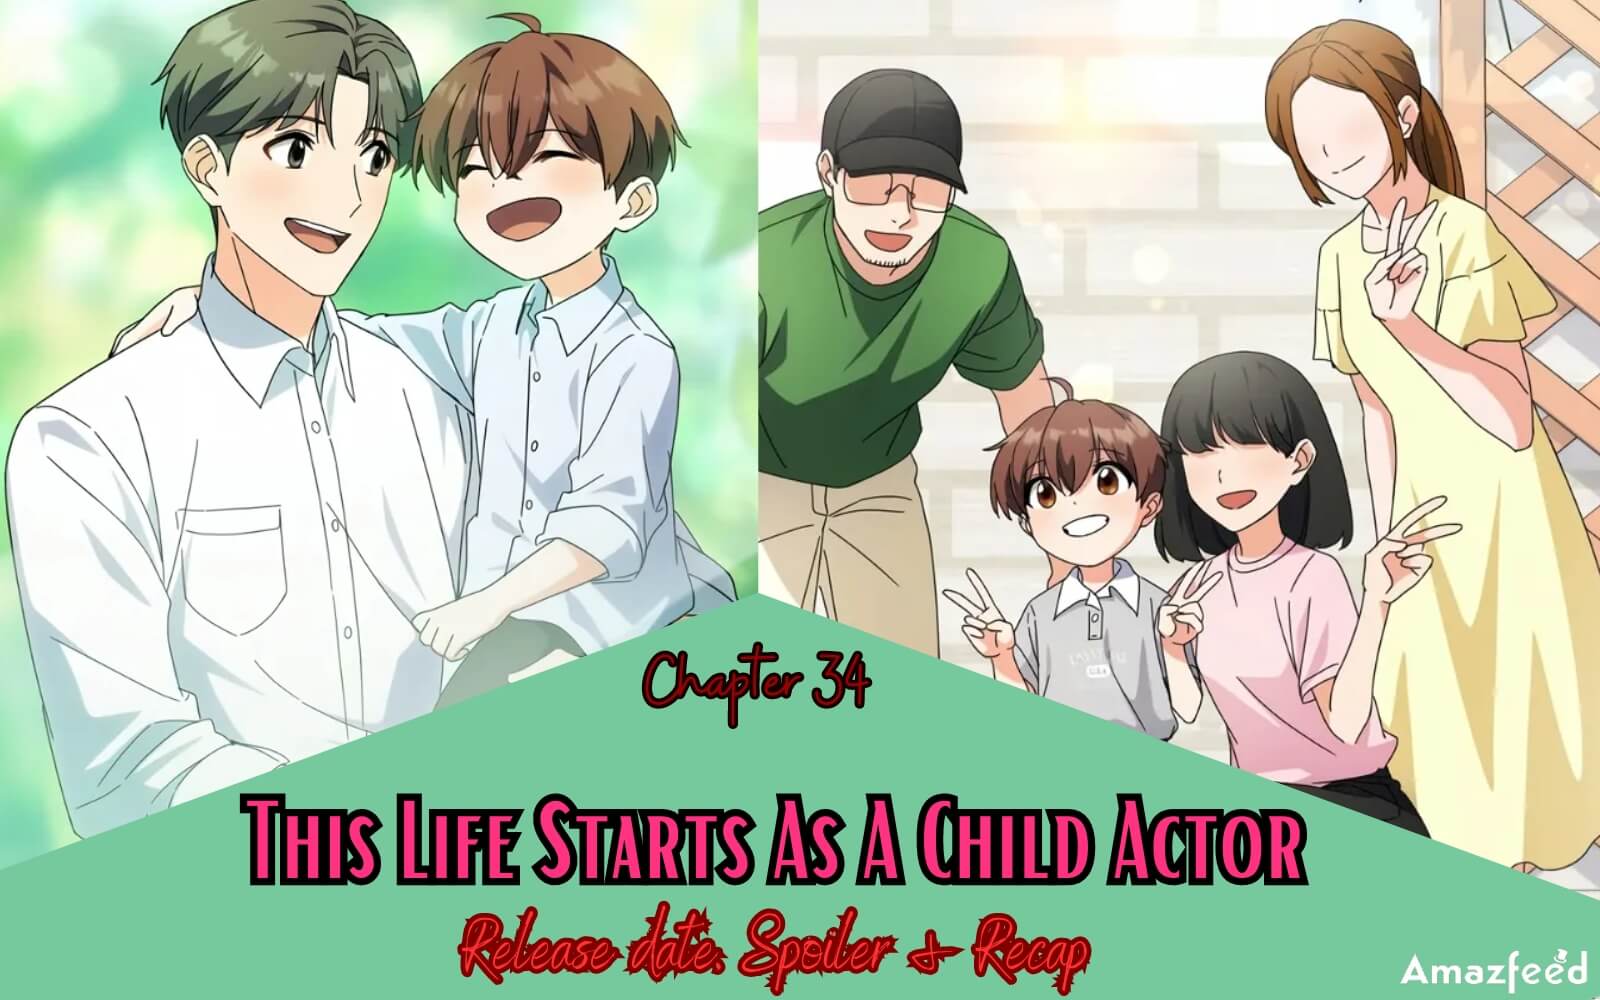 This Life Starts As A Child Actor Chapter 34 Release date, Spoiler & Recap